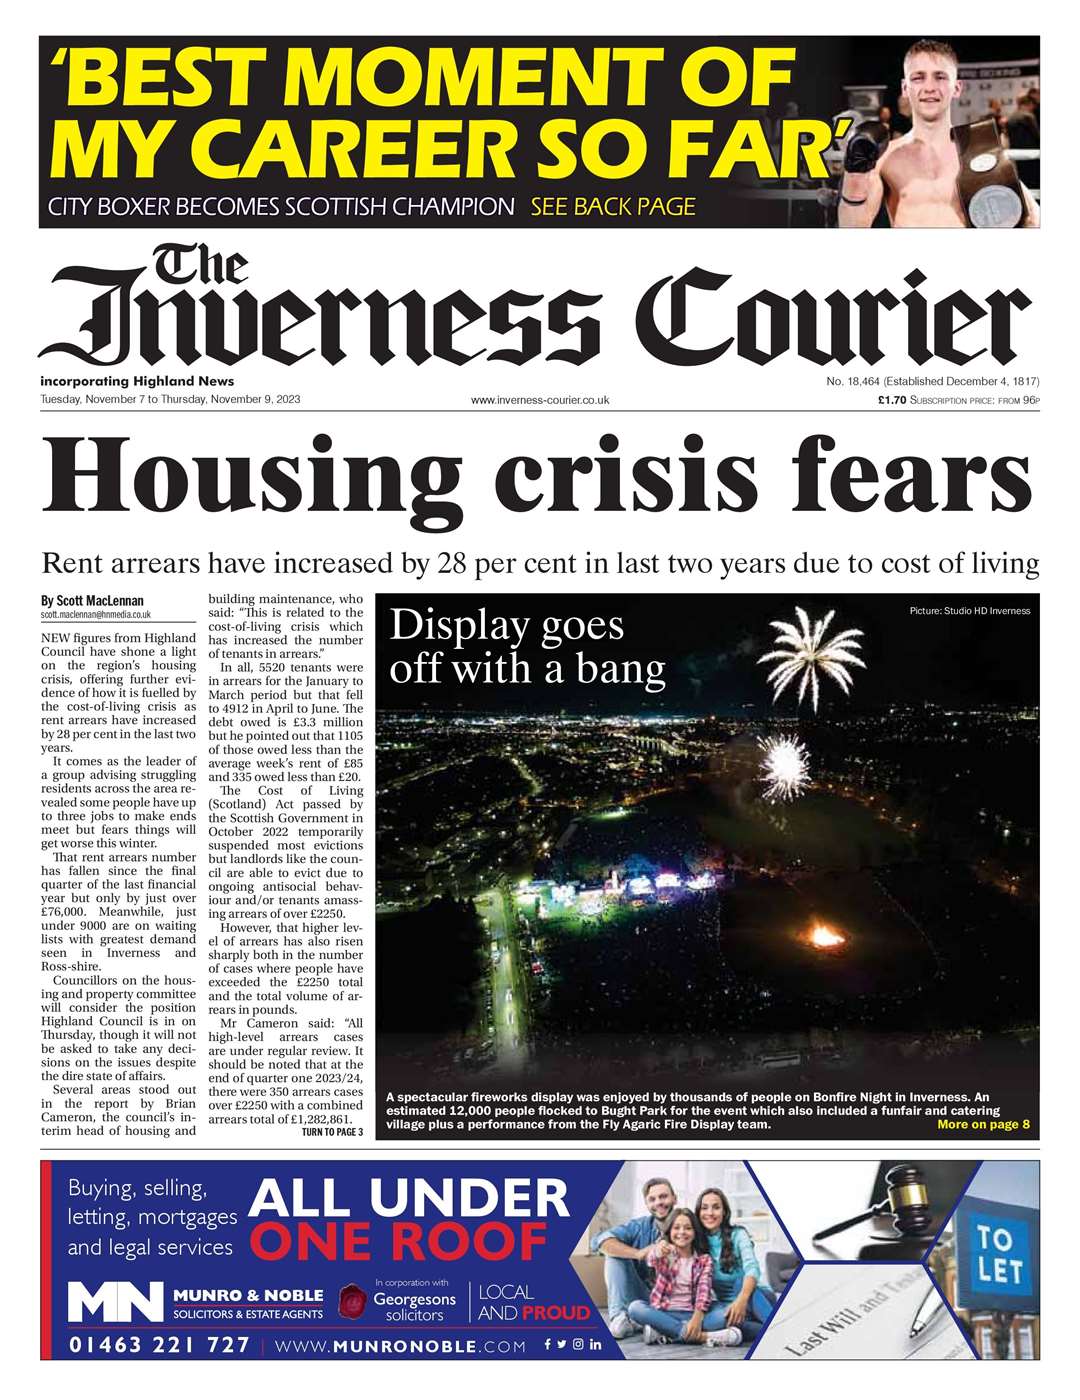 The Inverness Courier, November 7, front page.